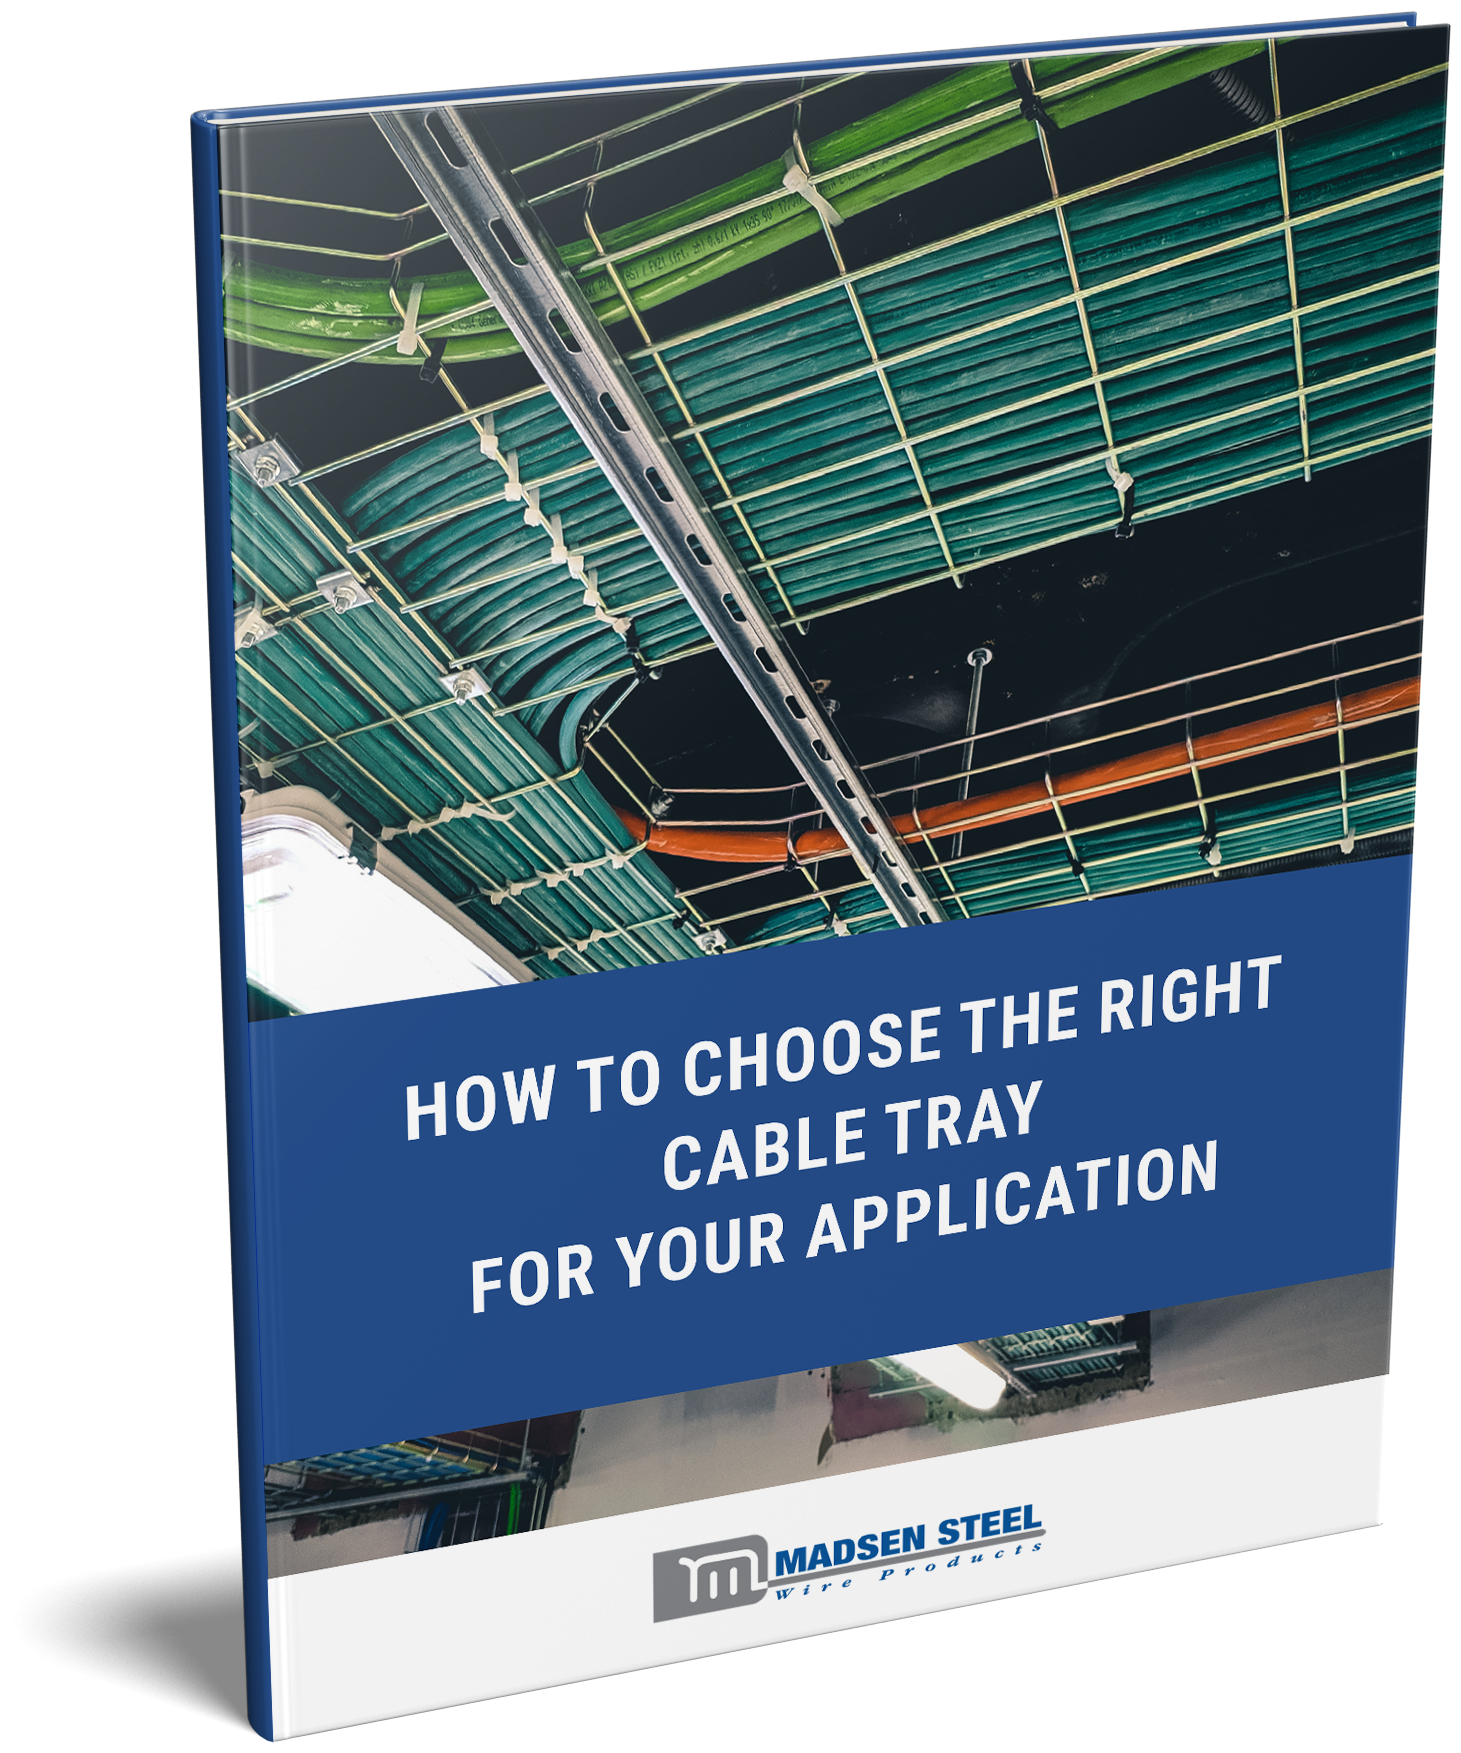 How to Choose the Right Cable Tray for Your Application